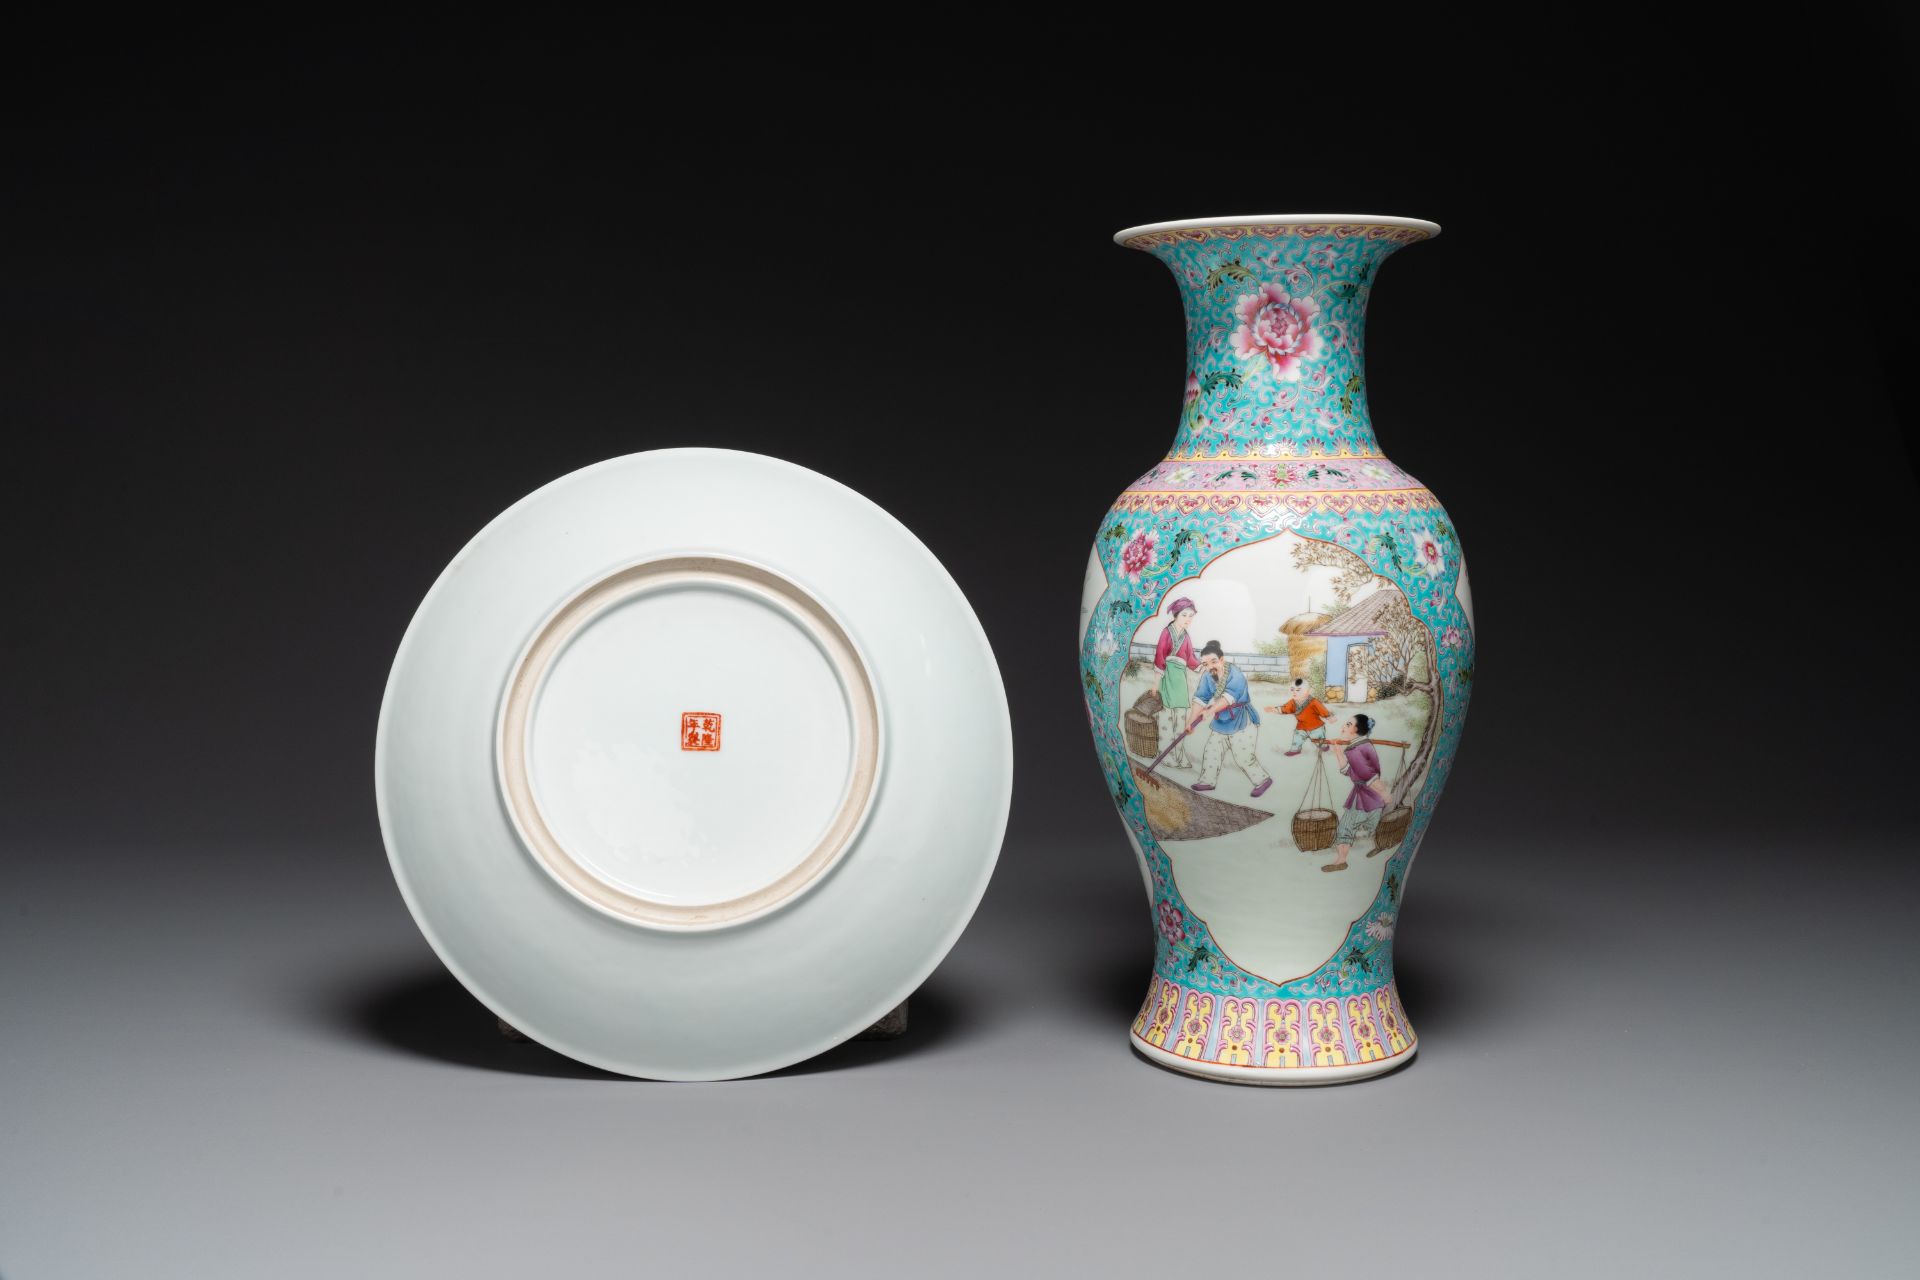 A Chinese famille rose dish with figural design and a 'rice production' vase, Qianlong mark, 20th C. - Image 2 of 4